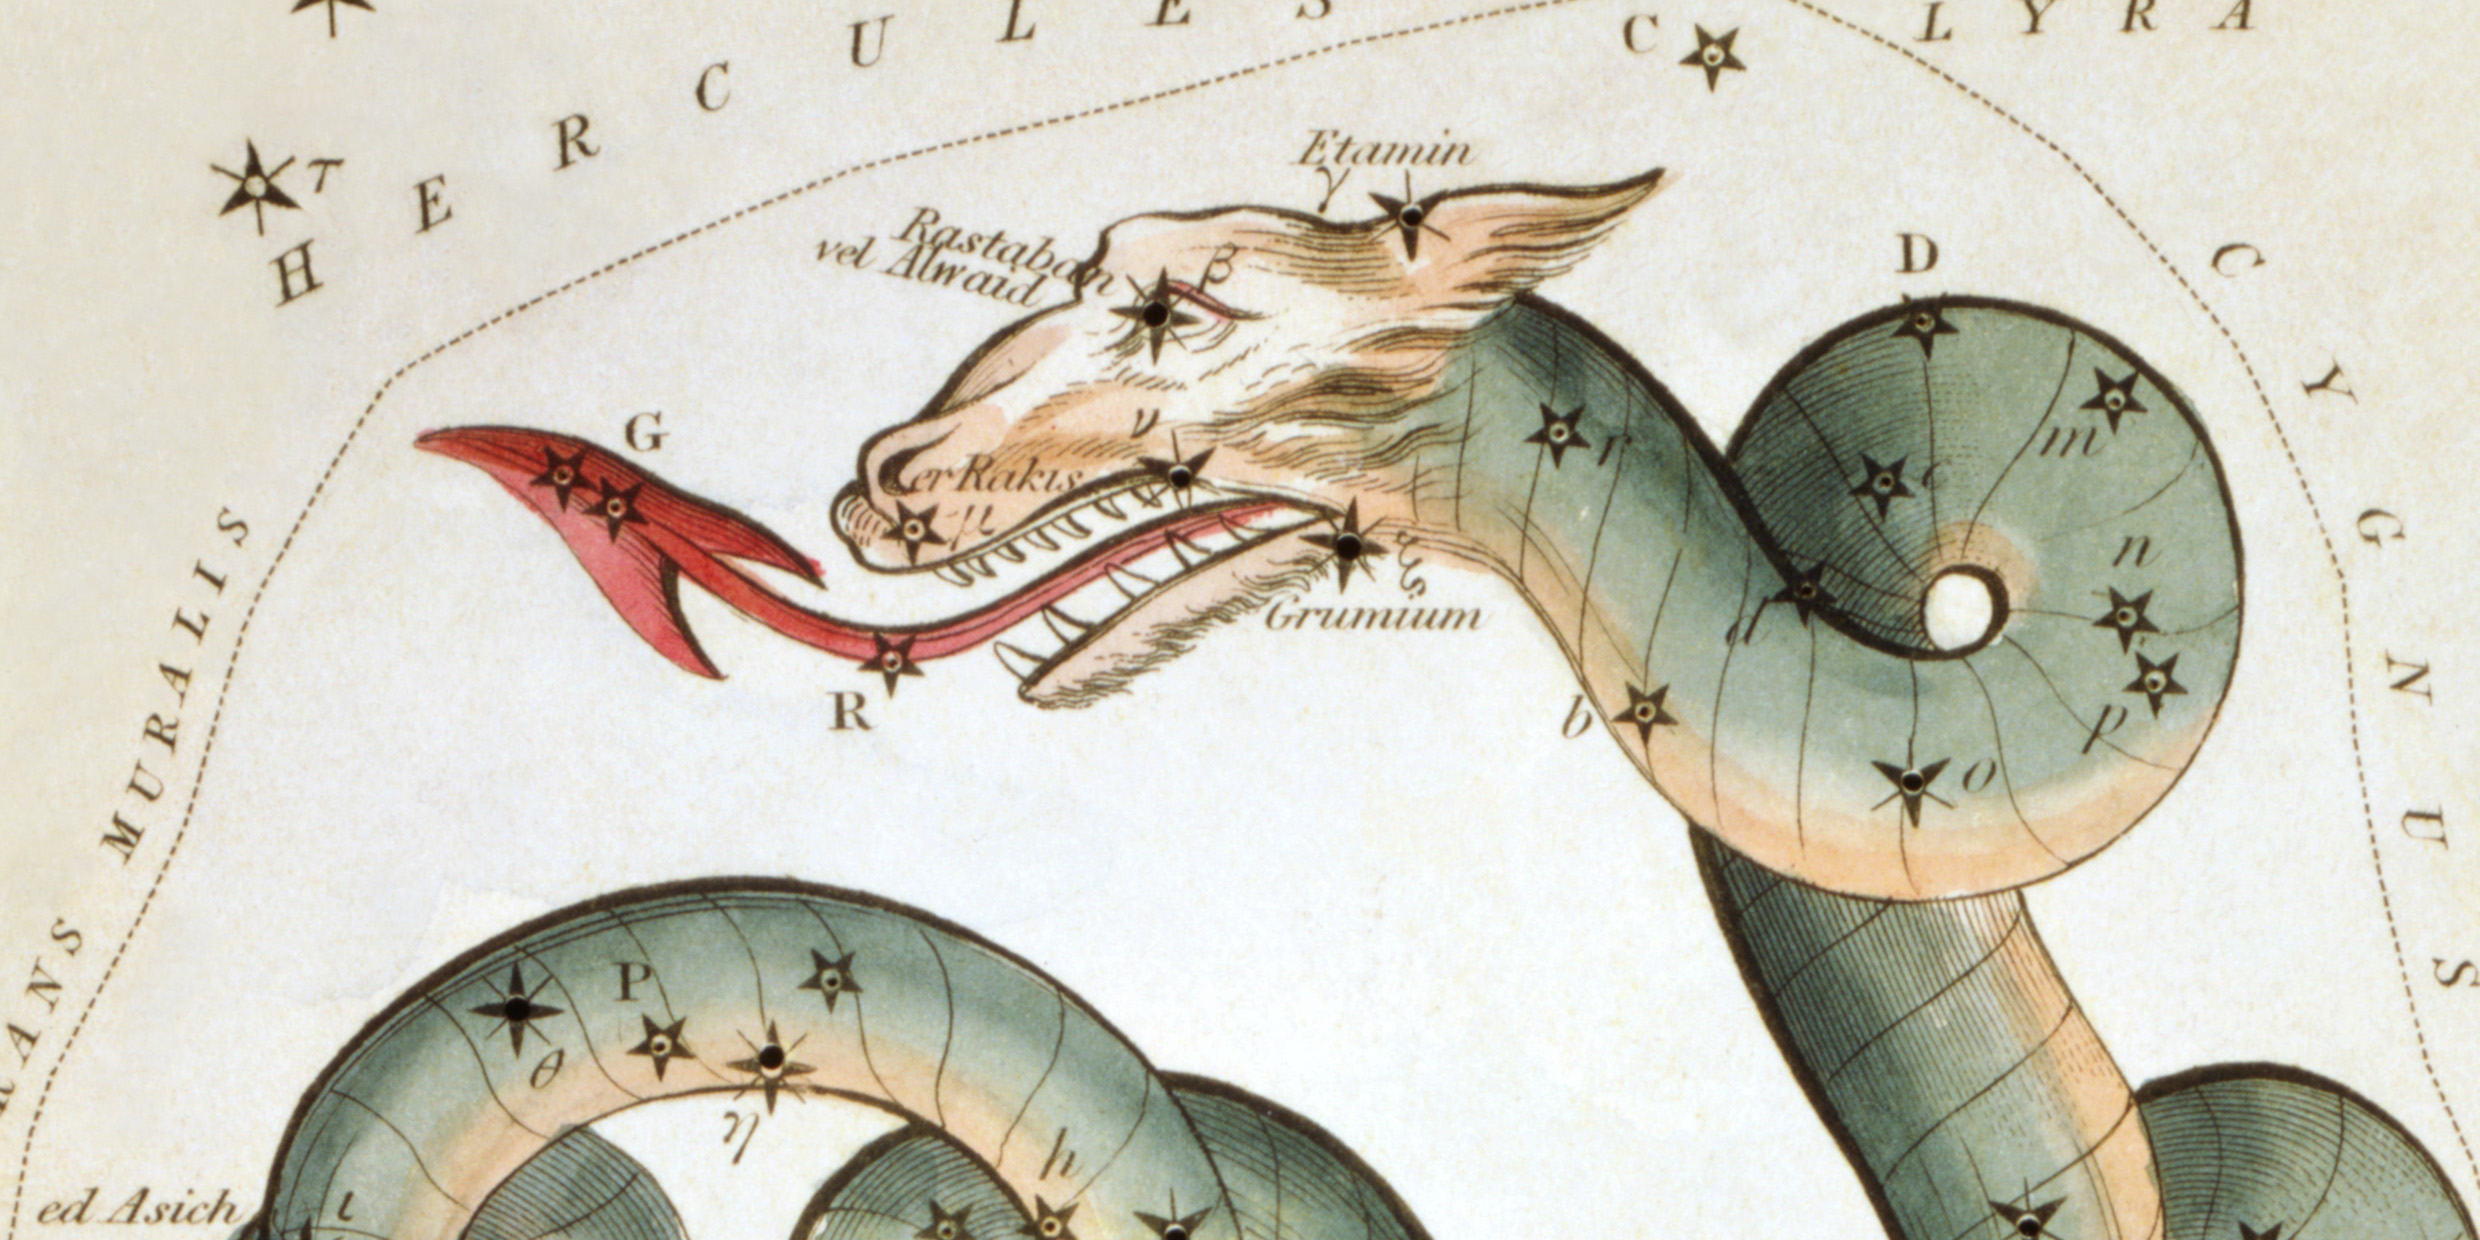 Illustration of a stylized dragon's head superimposed over a constellation of stars